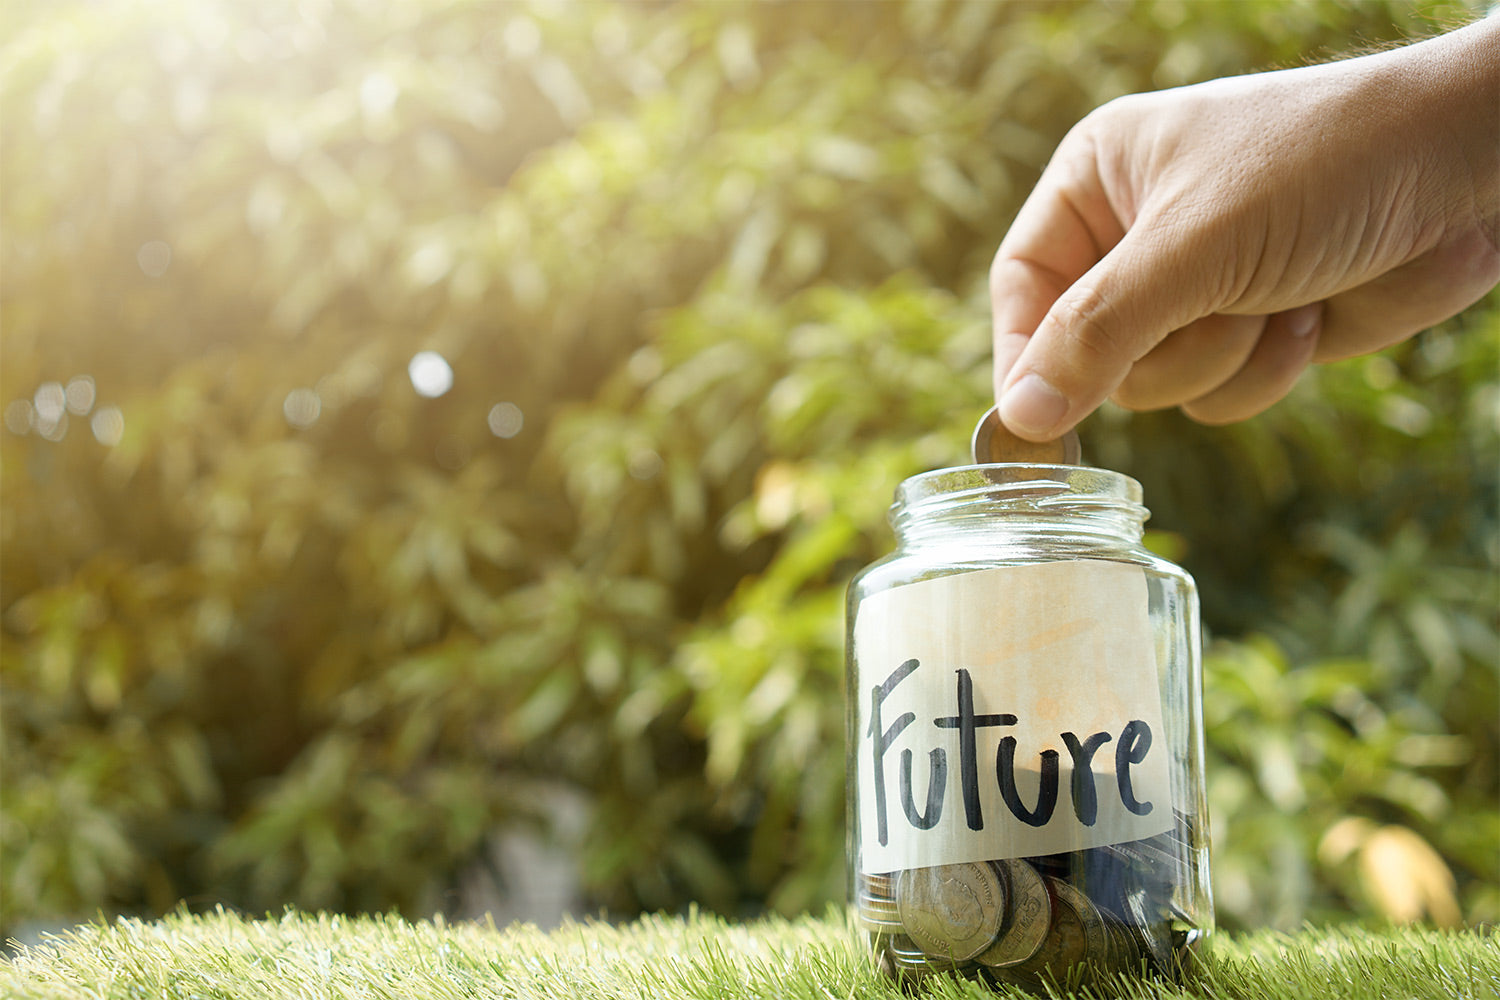 Man putting money into a jar labeled "Future"